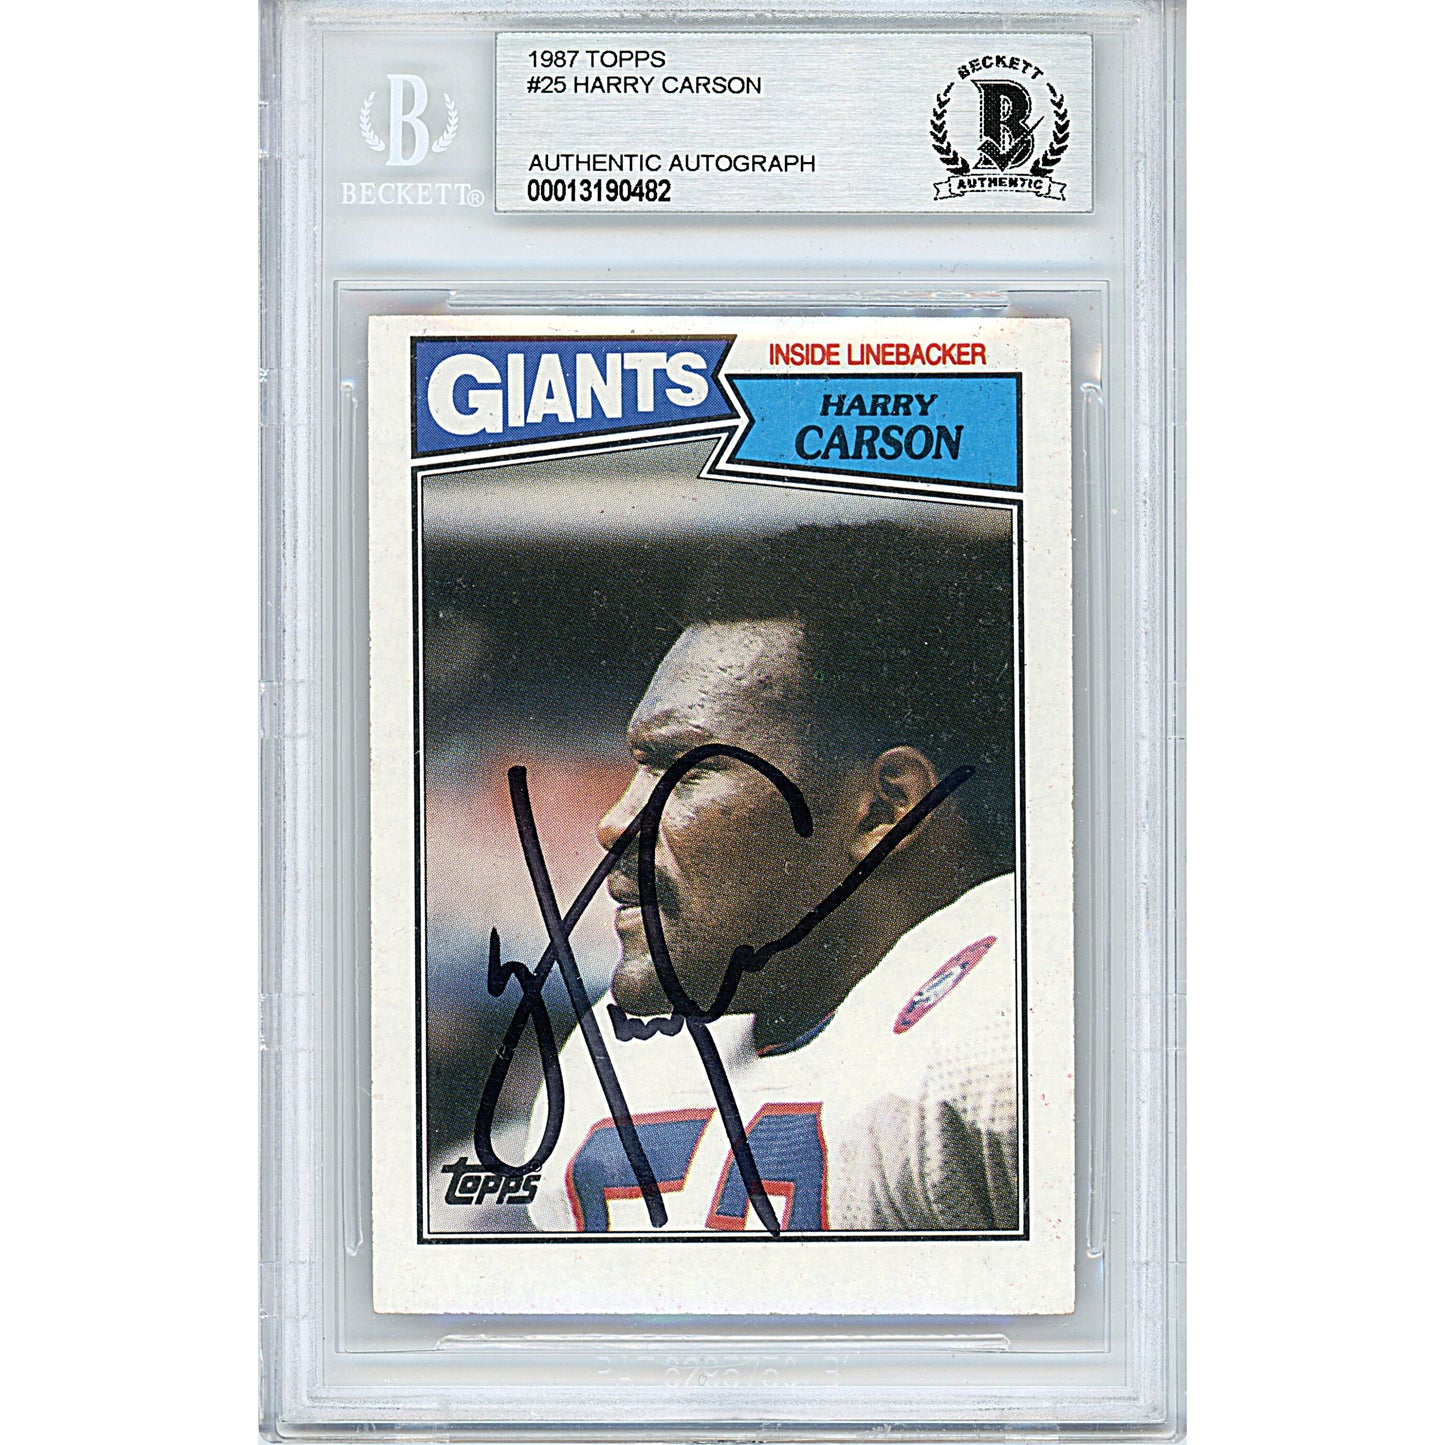 Footballs- Autographed- Harry Carson Signed New York Giants 1987 Topps Football Card Beckett BAS Authenticated Slabbed 00013190482 - 101